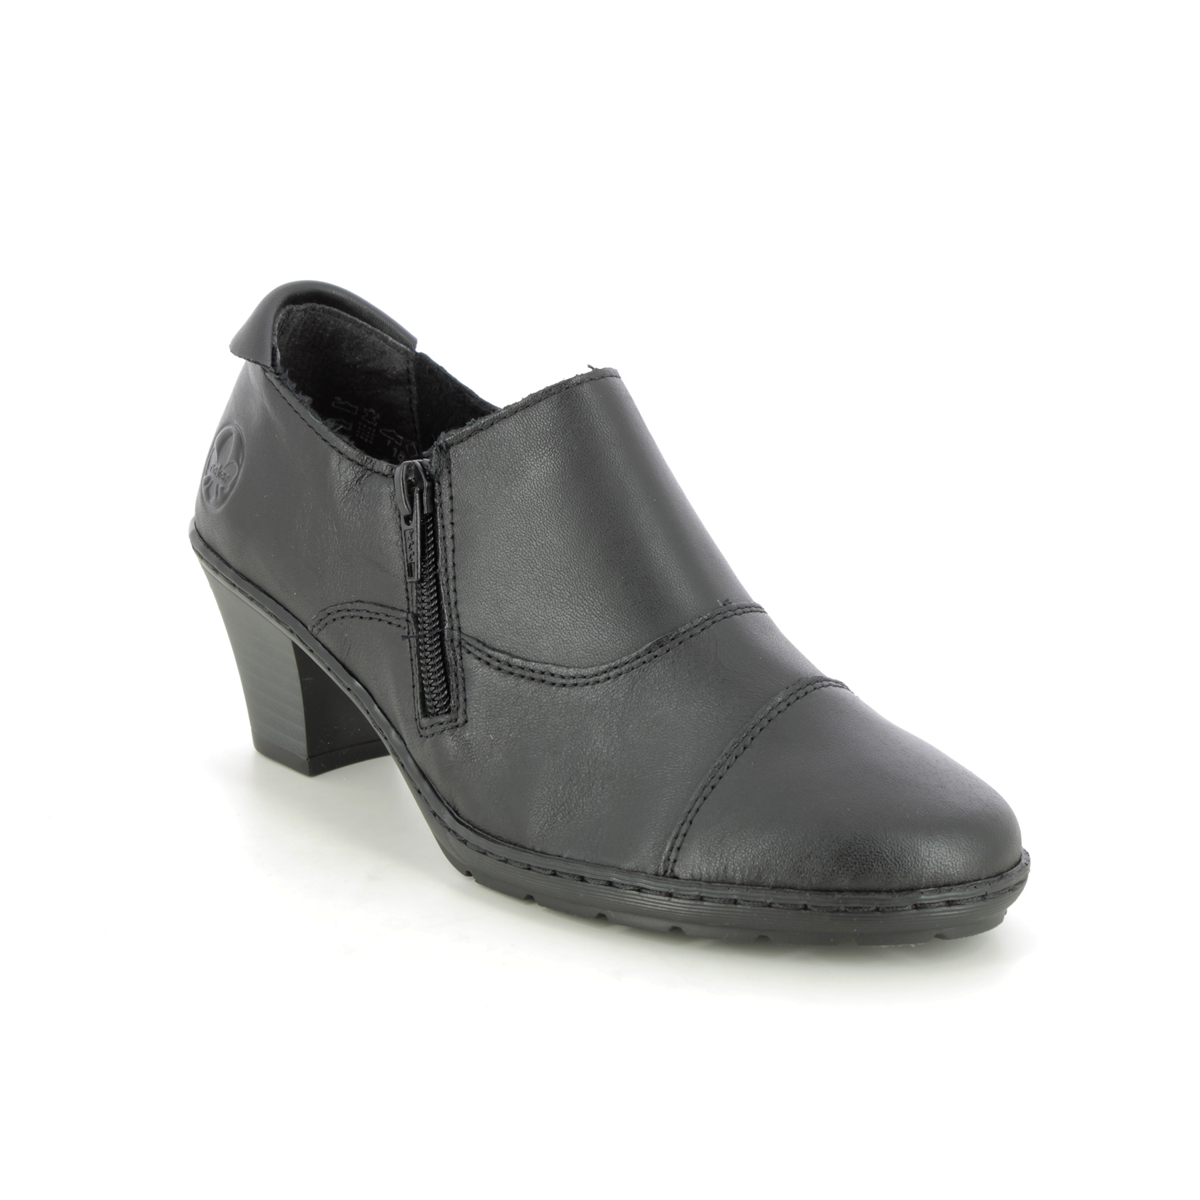 Rieker 57173-02 Black leather Womens shoe-boots in a Plain Leather in Size 39